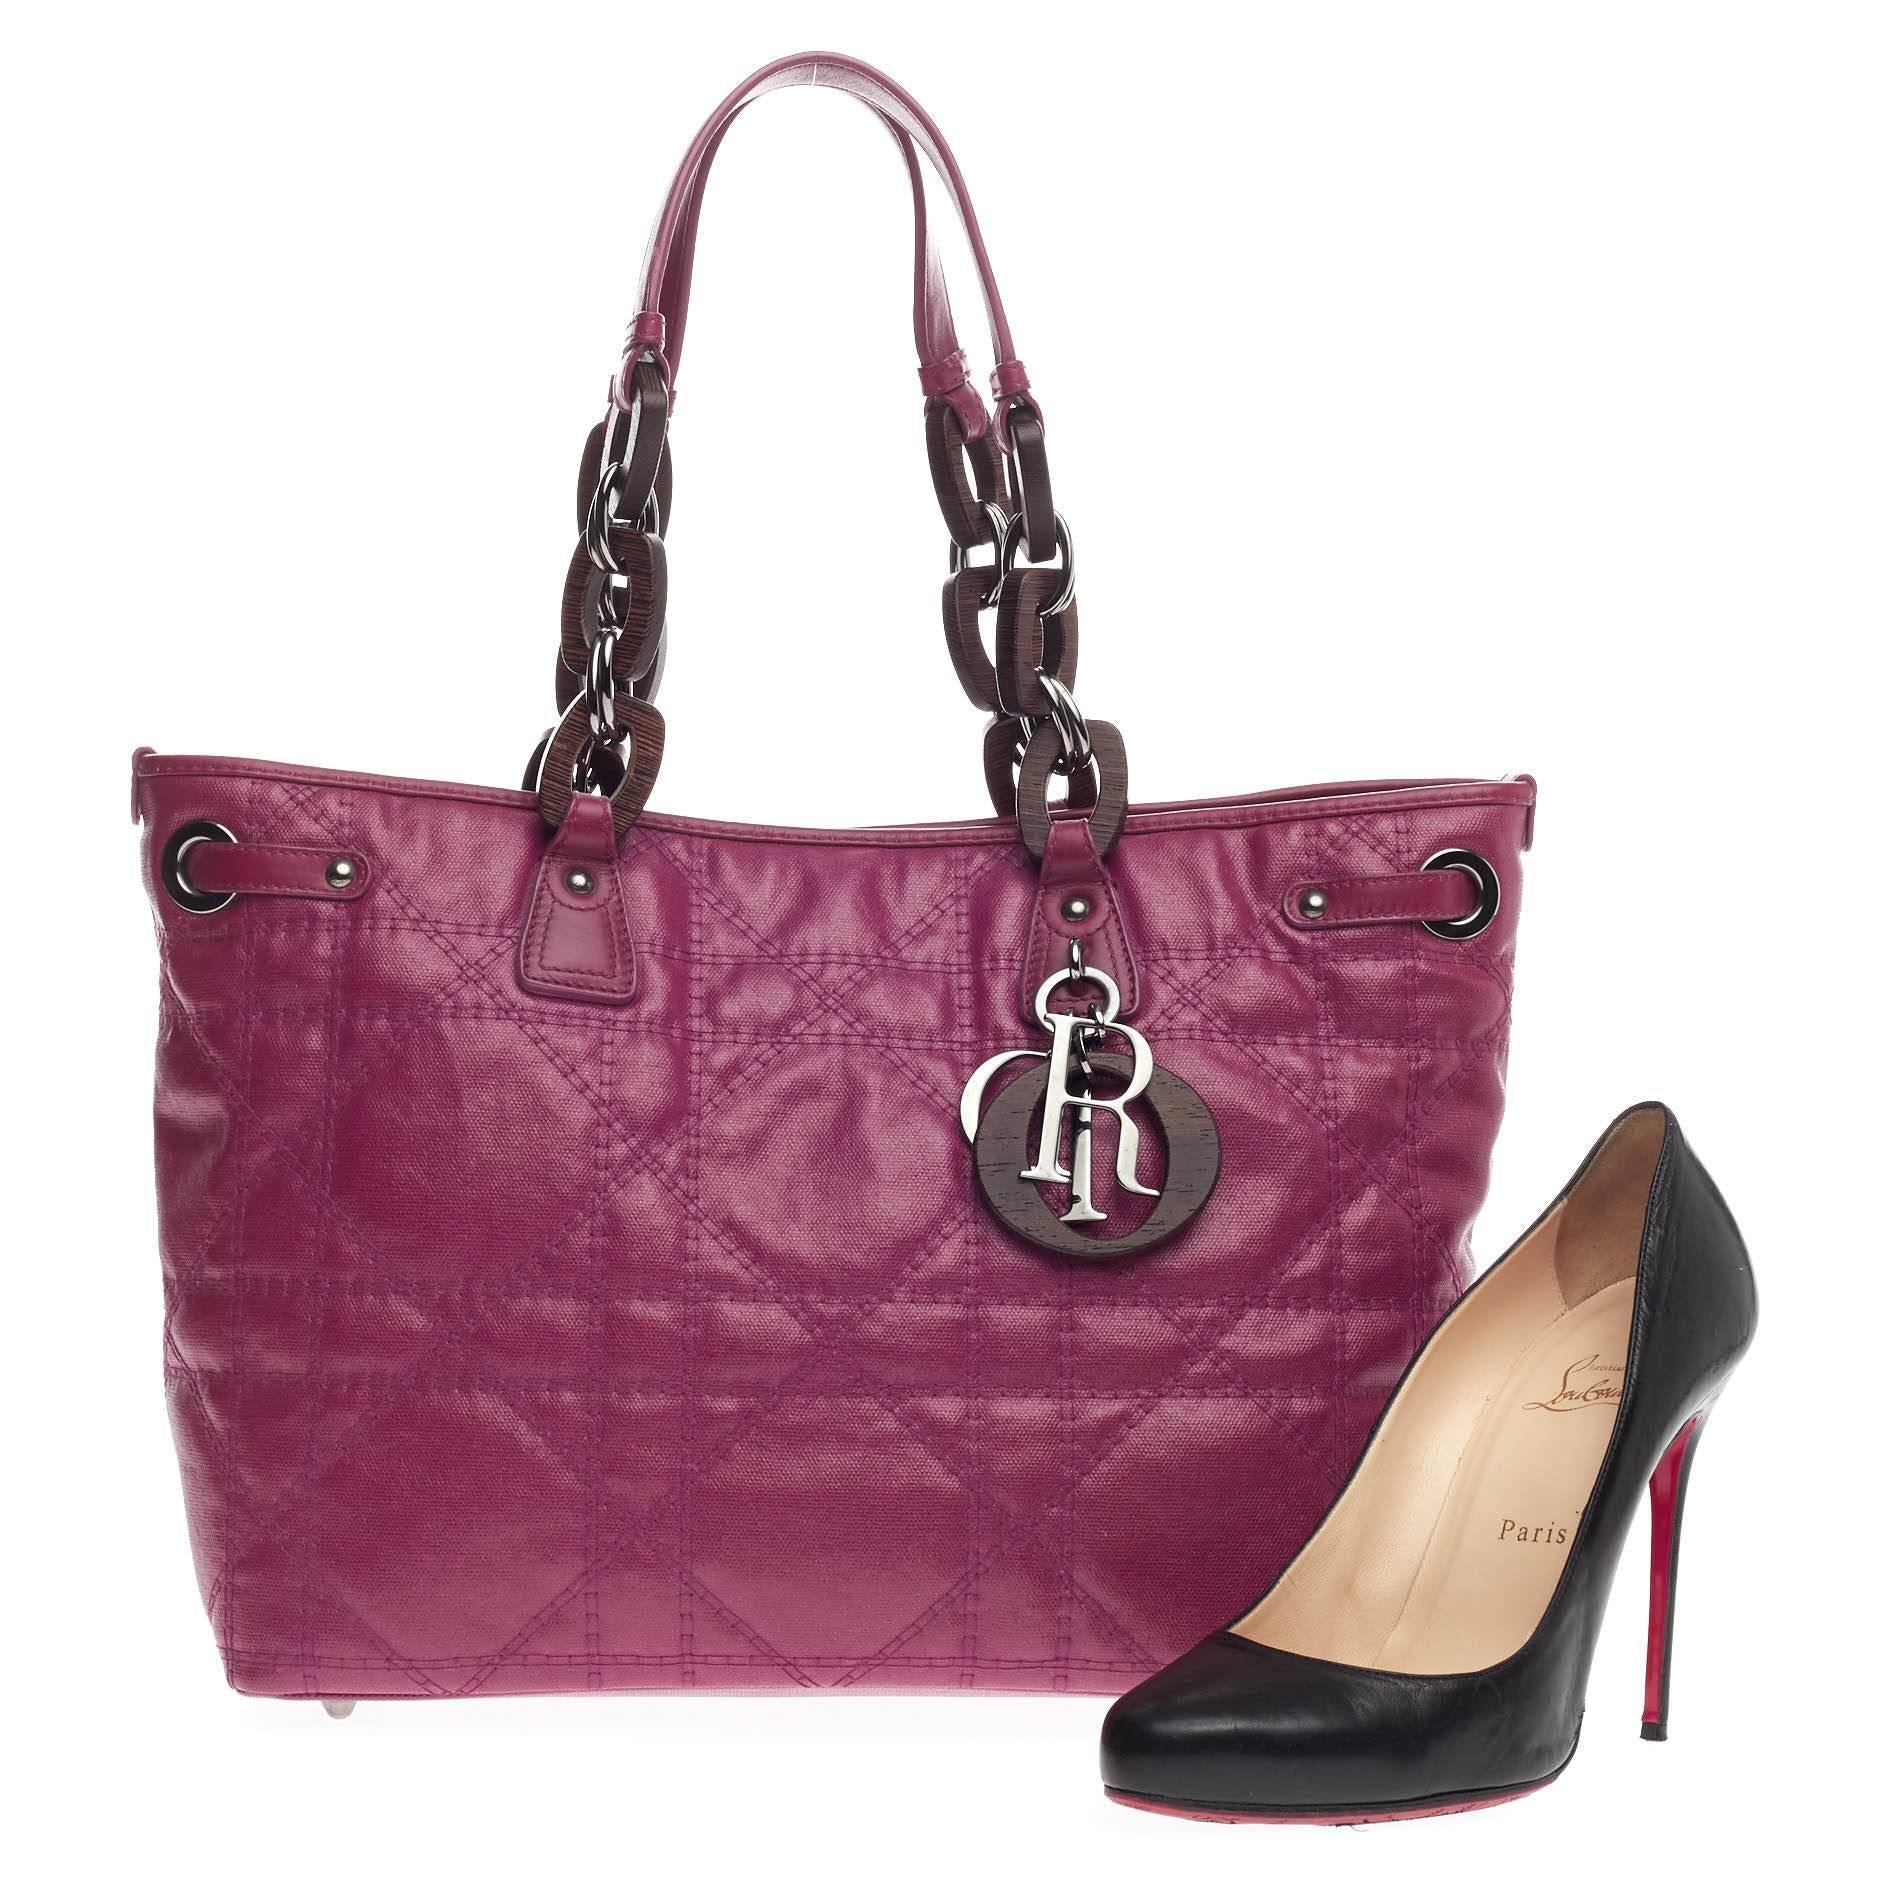 This authentic Christian Dior Panarea Wood Link Tote Cannage Quilt Canvas Medium is a classic for every fashionista. Crafted in magenta pink quilted canvas, this updated chic tote features Dior's signature cannage quilting, dual wooden link straps